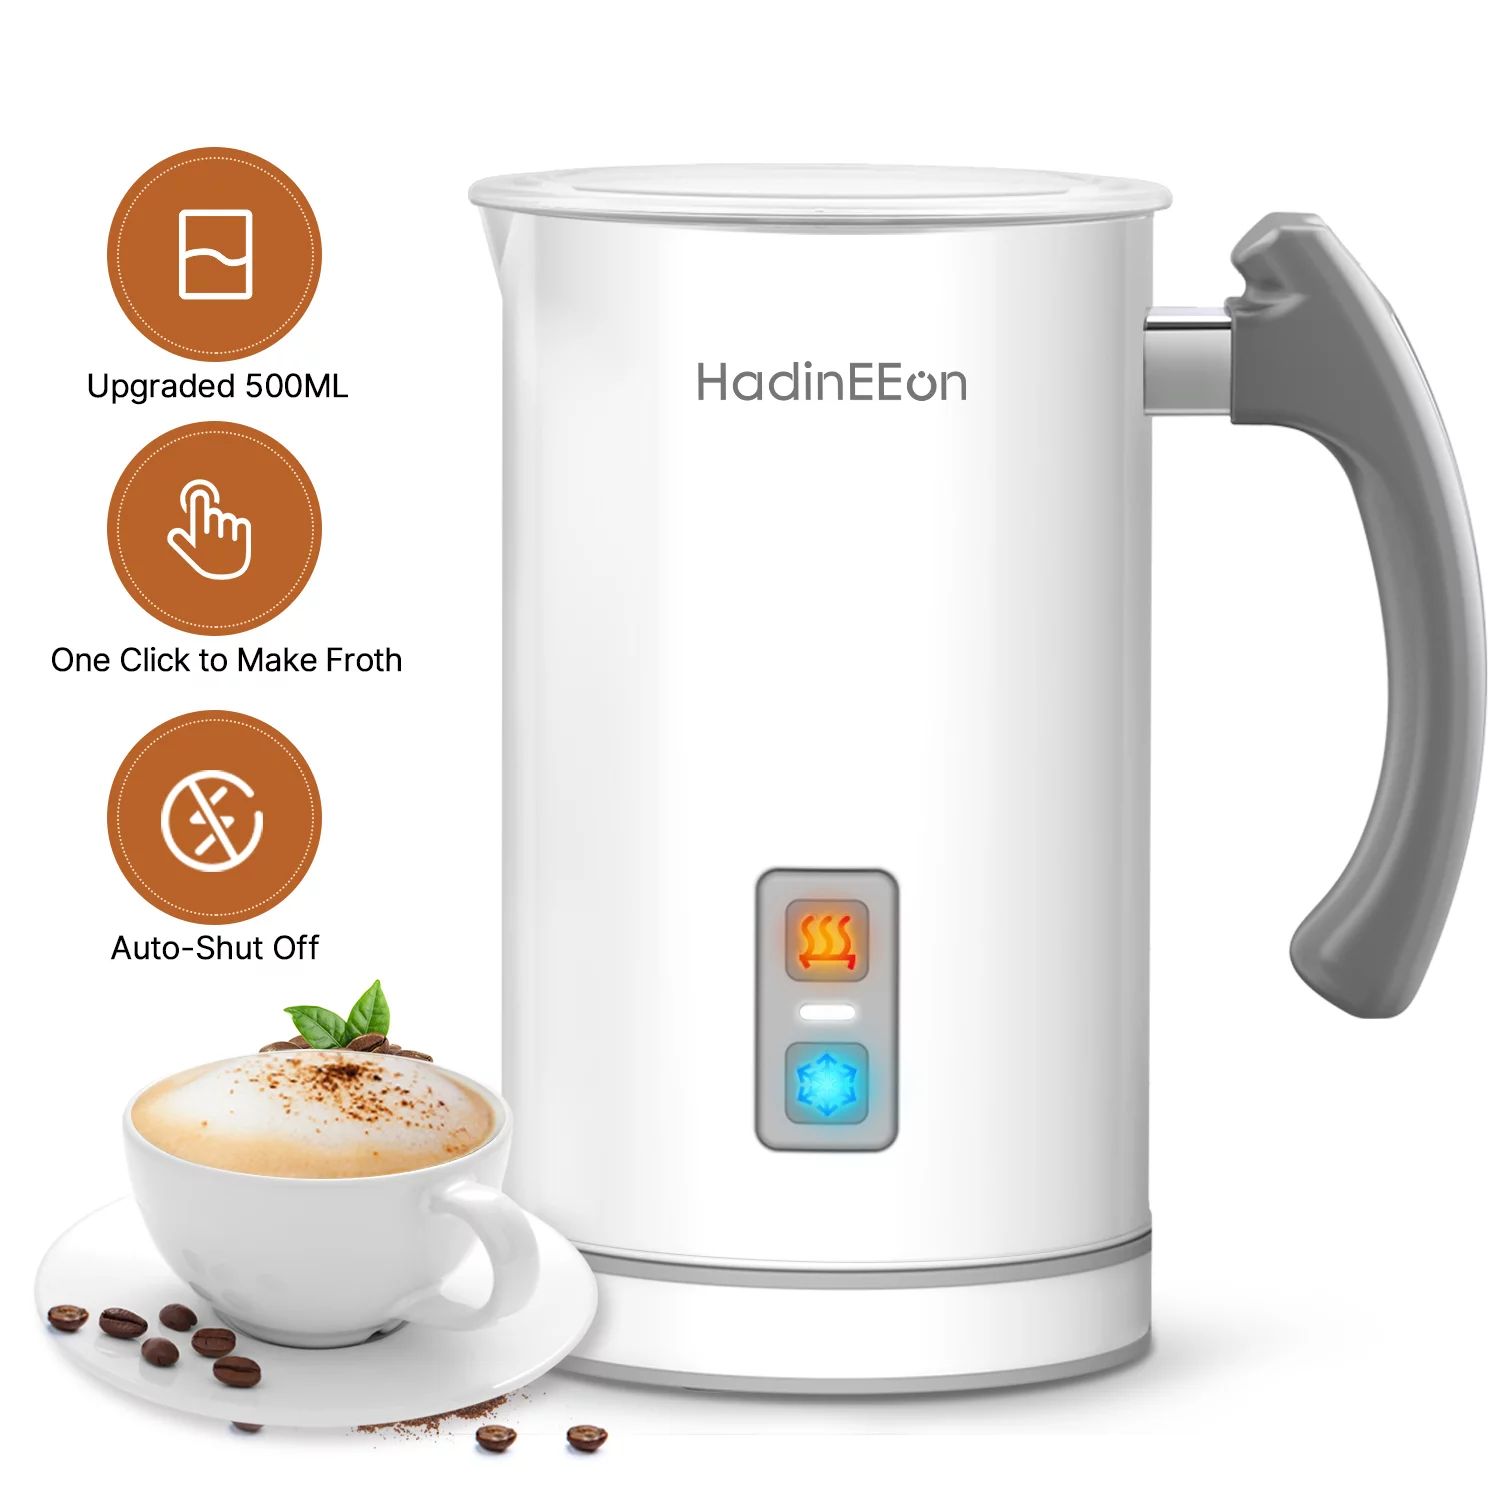 HadinEEon Milk Frother,500ml Electric Milk Steamer, Automatic Hot or Cold Milk Frother Warmer,Foa... | Walmart (US)